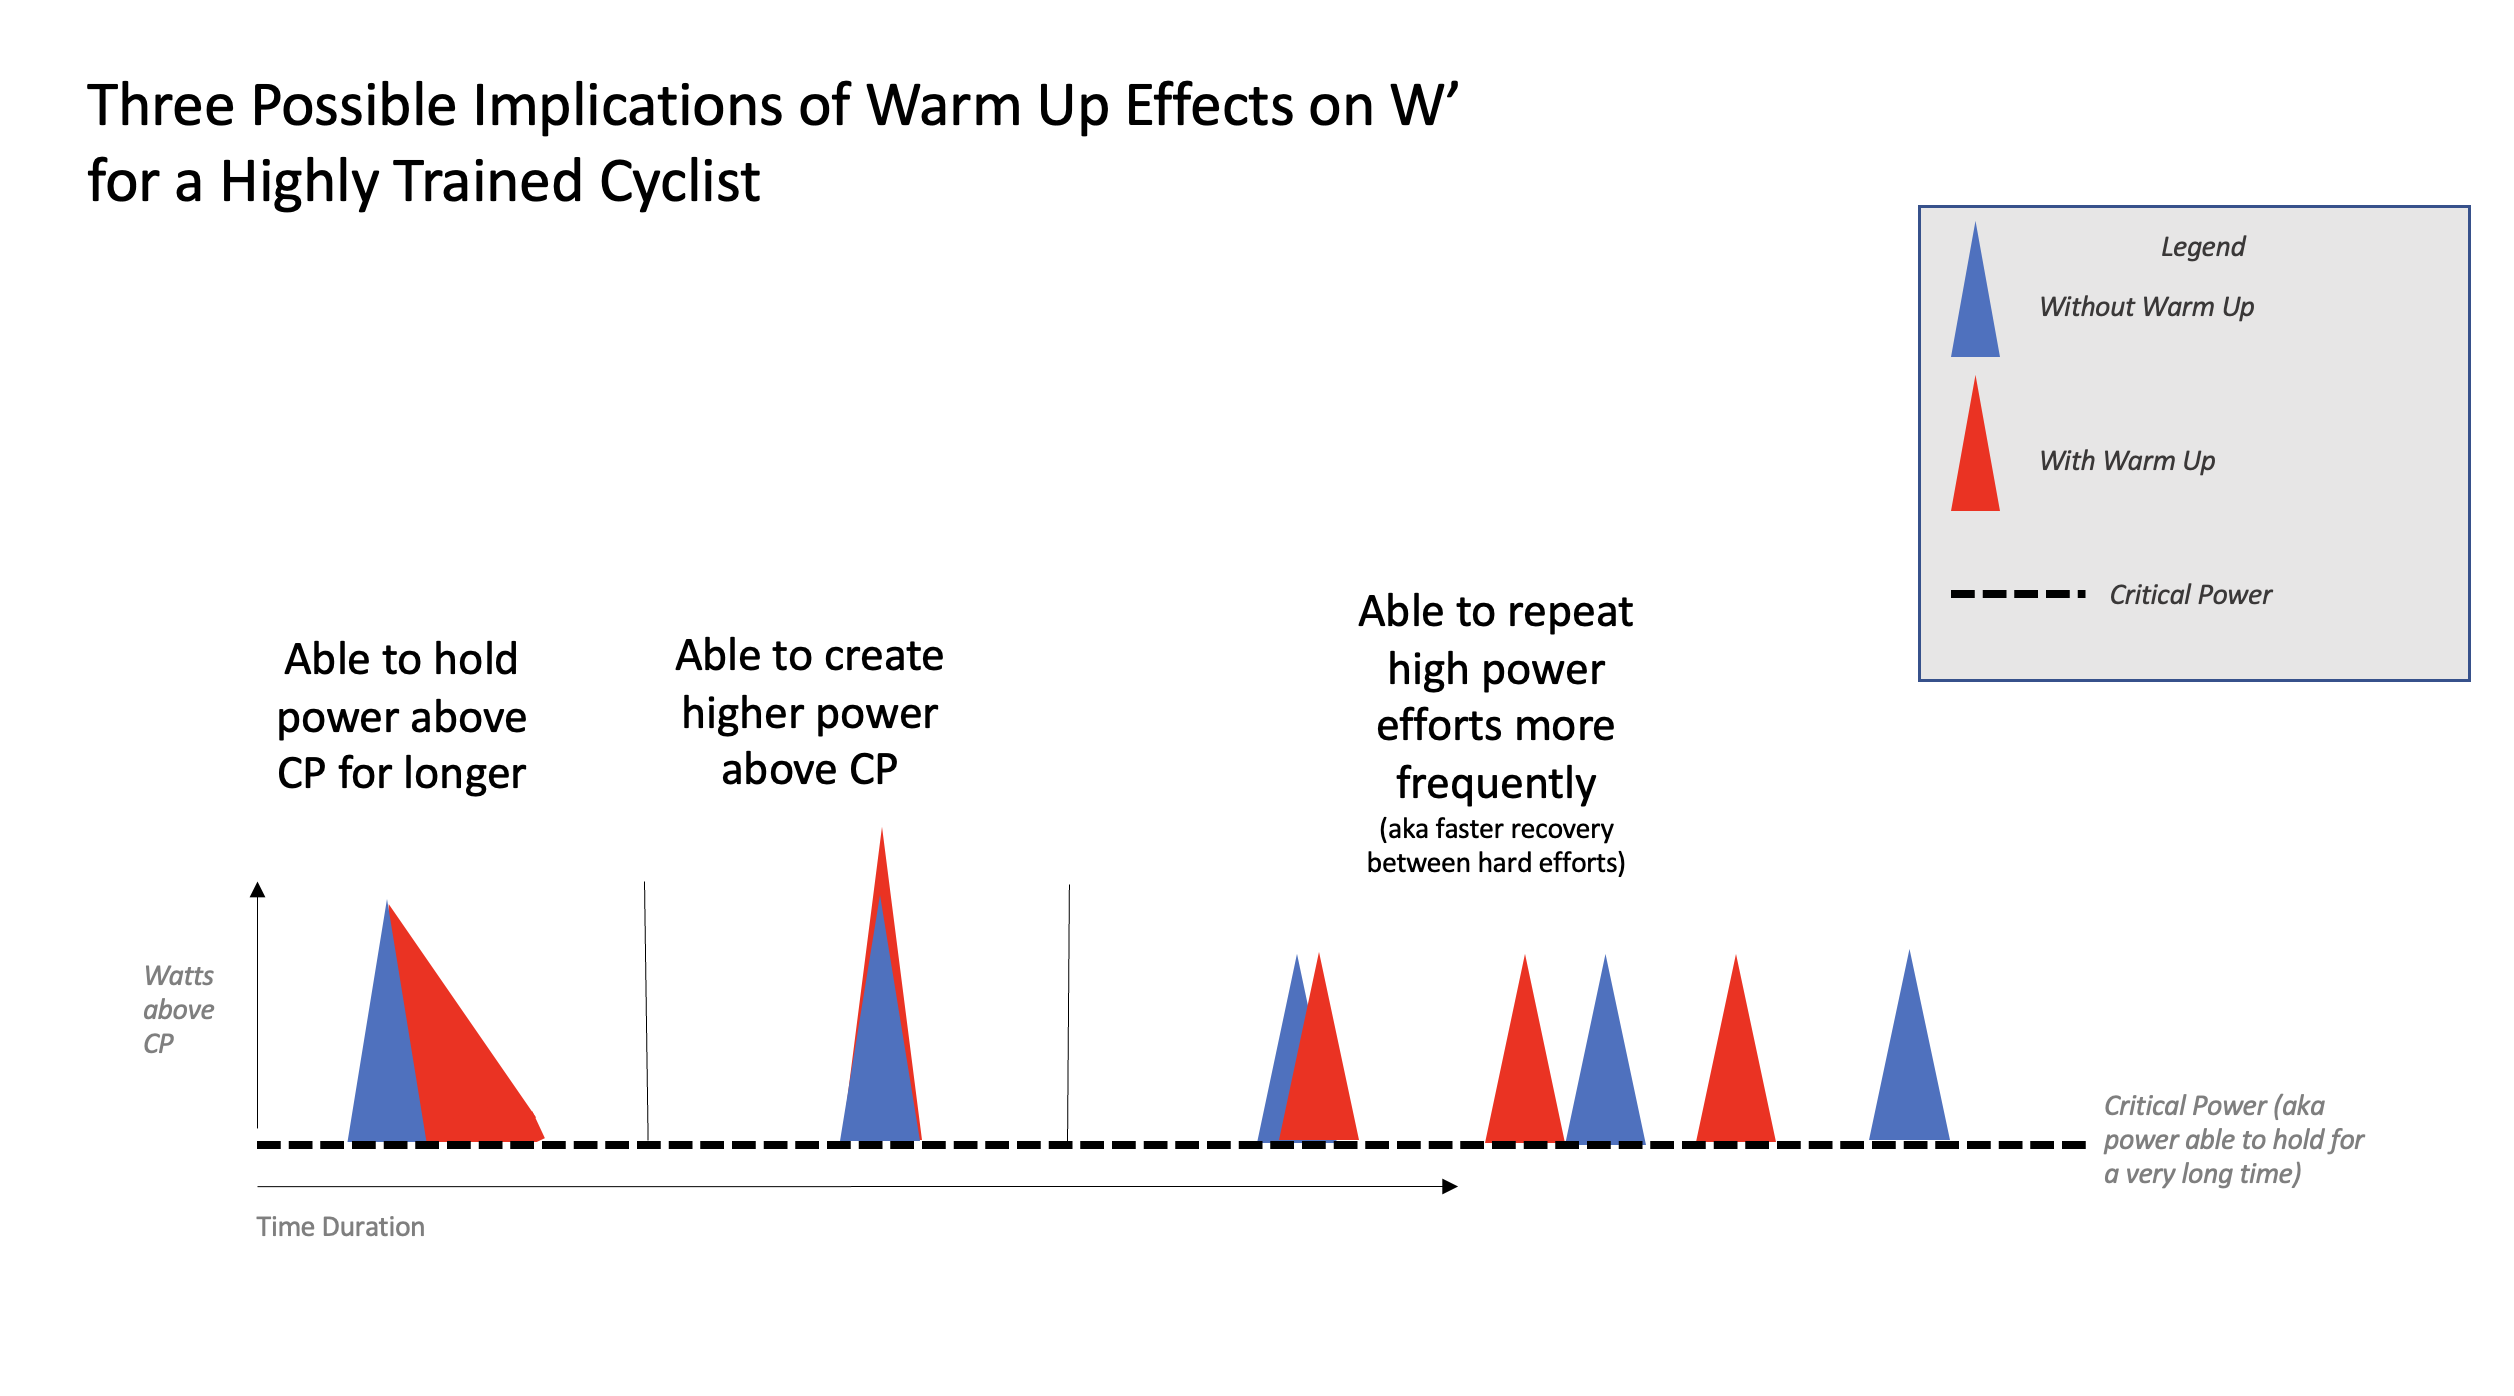 Chart of Three Possible Implications of Warming Up on W Prime for a Highly Trained Cyclist